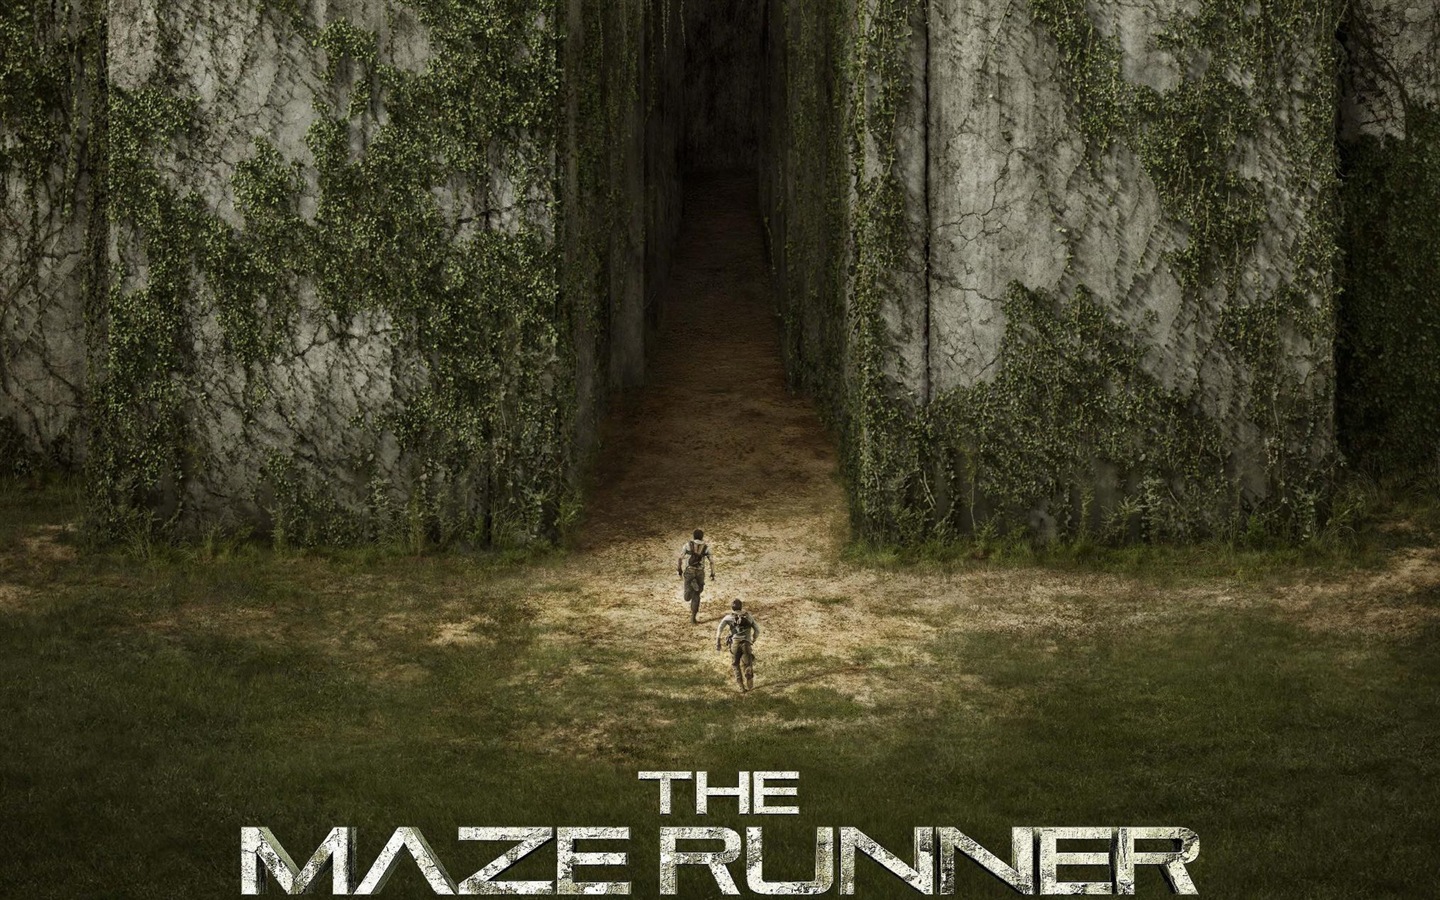 The Maze Runner HD movie wallpapers #5 - 1440x900